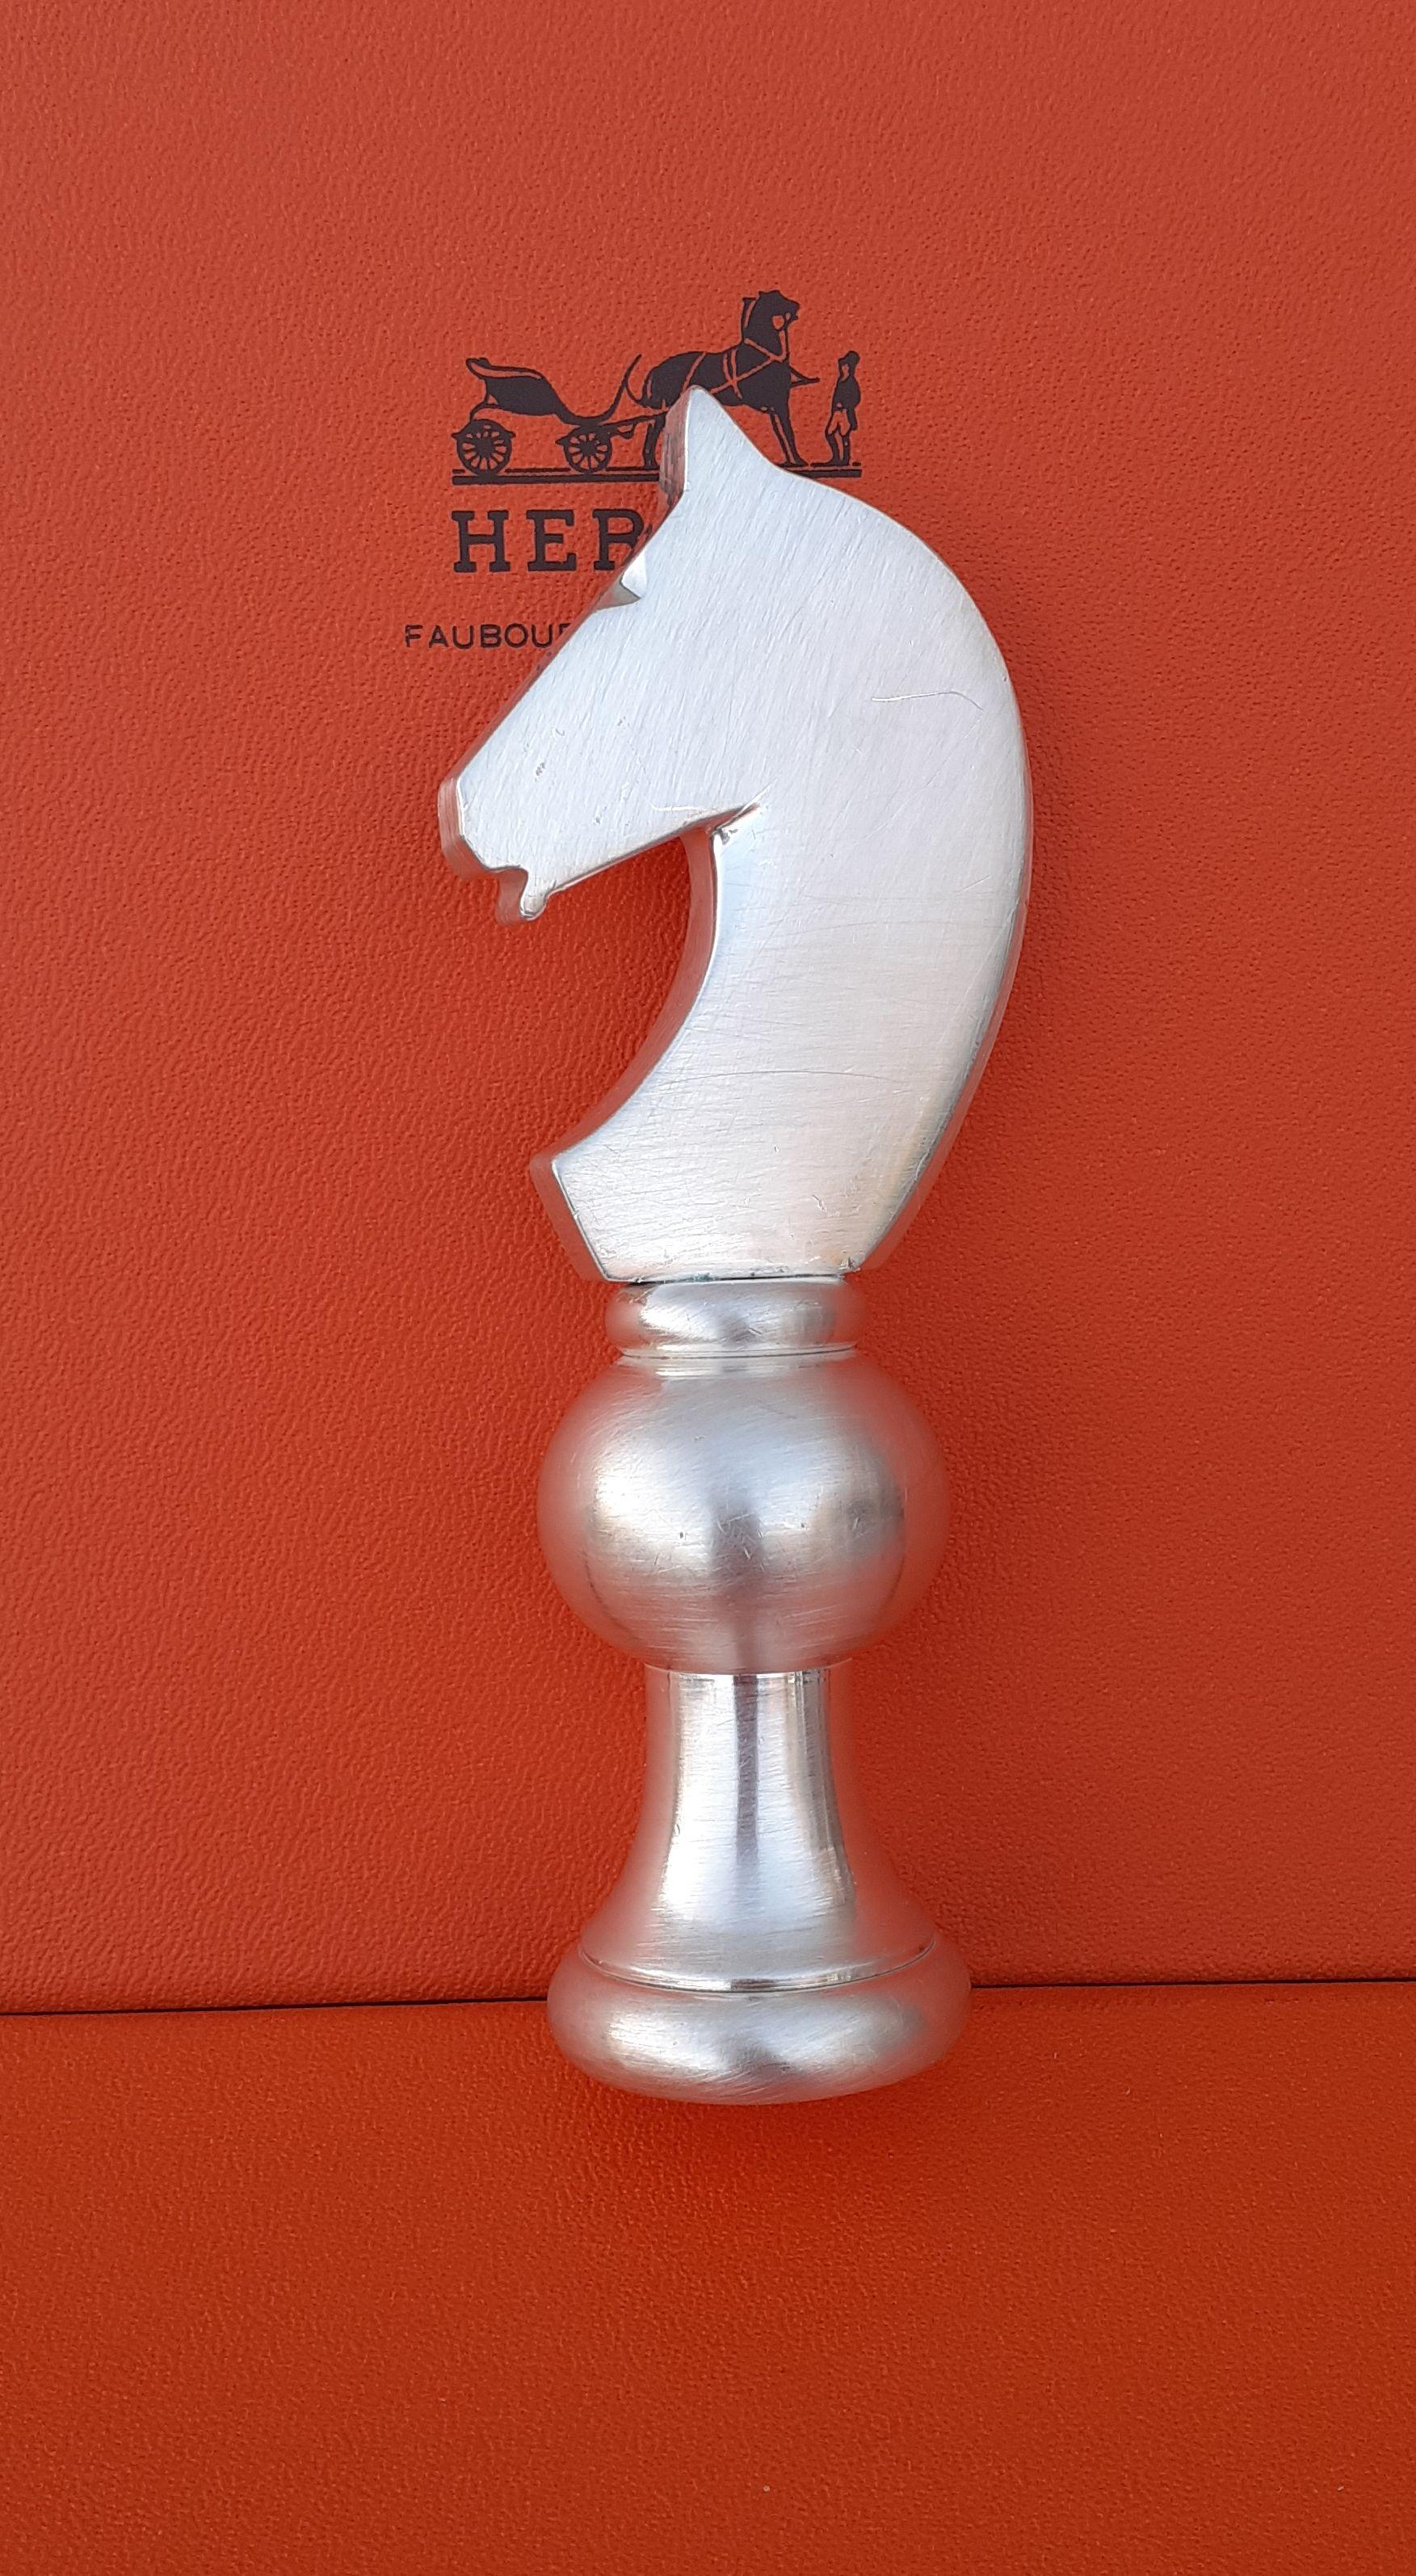 Exceptional Authentic Hermès Bottle Opener

Horse Shaped

Made by Ravinet d'Enfert for Hermès

Made in France

Made of silver-tone Metal

